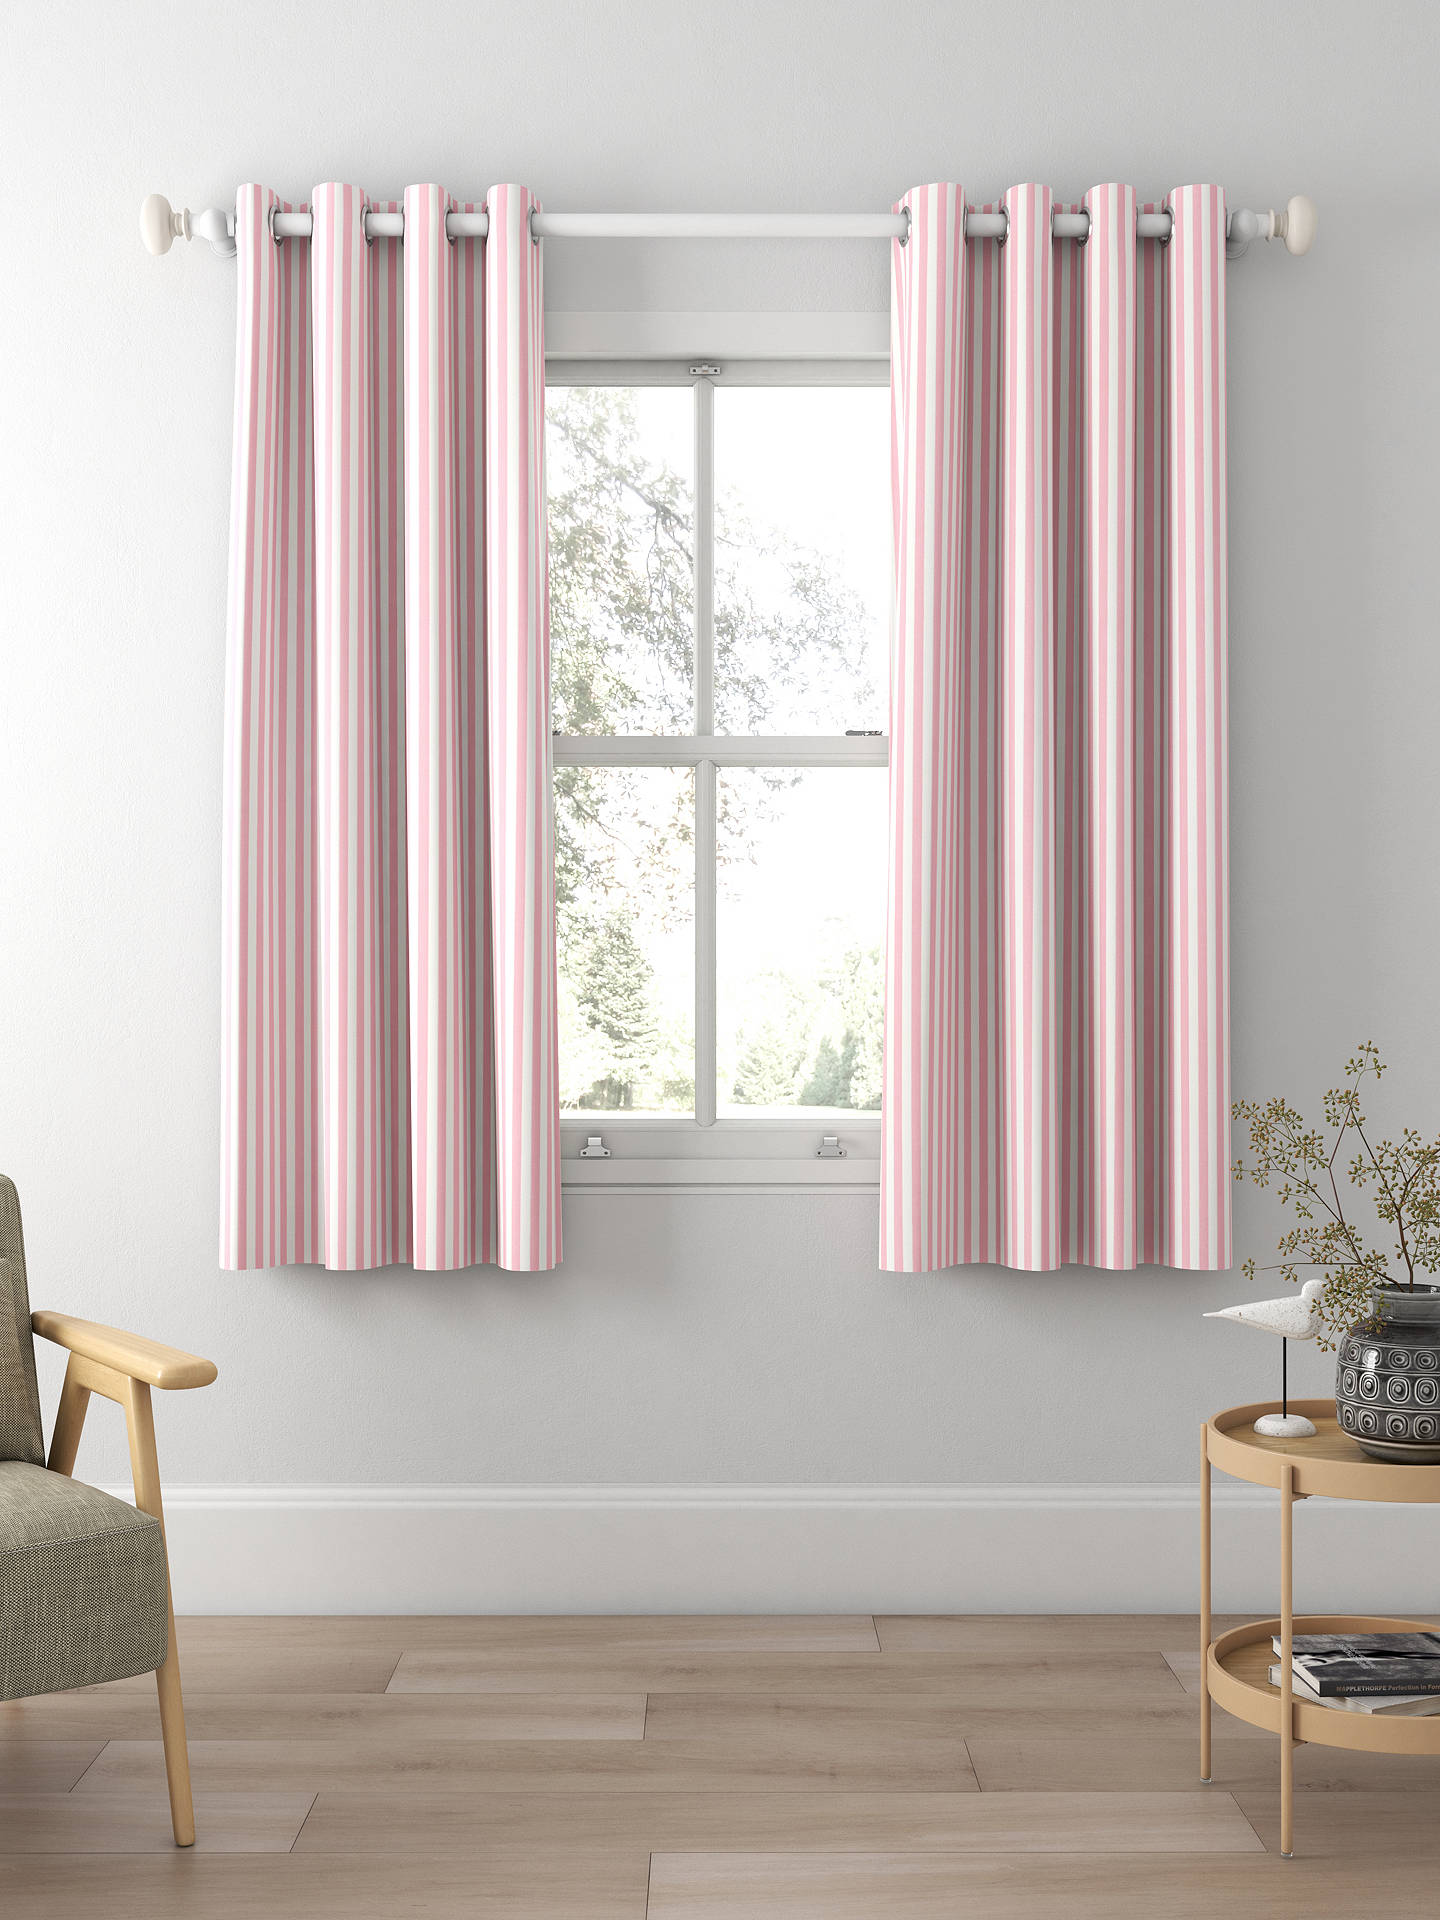 Harlequin Carnival Stripe Made to Measure Curtains, Blossom